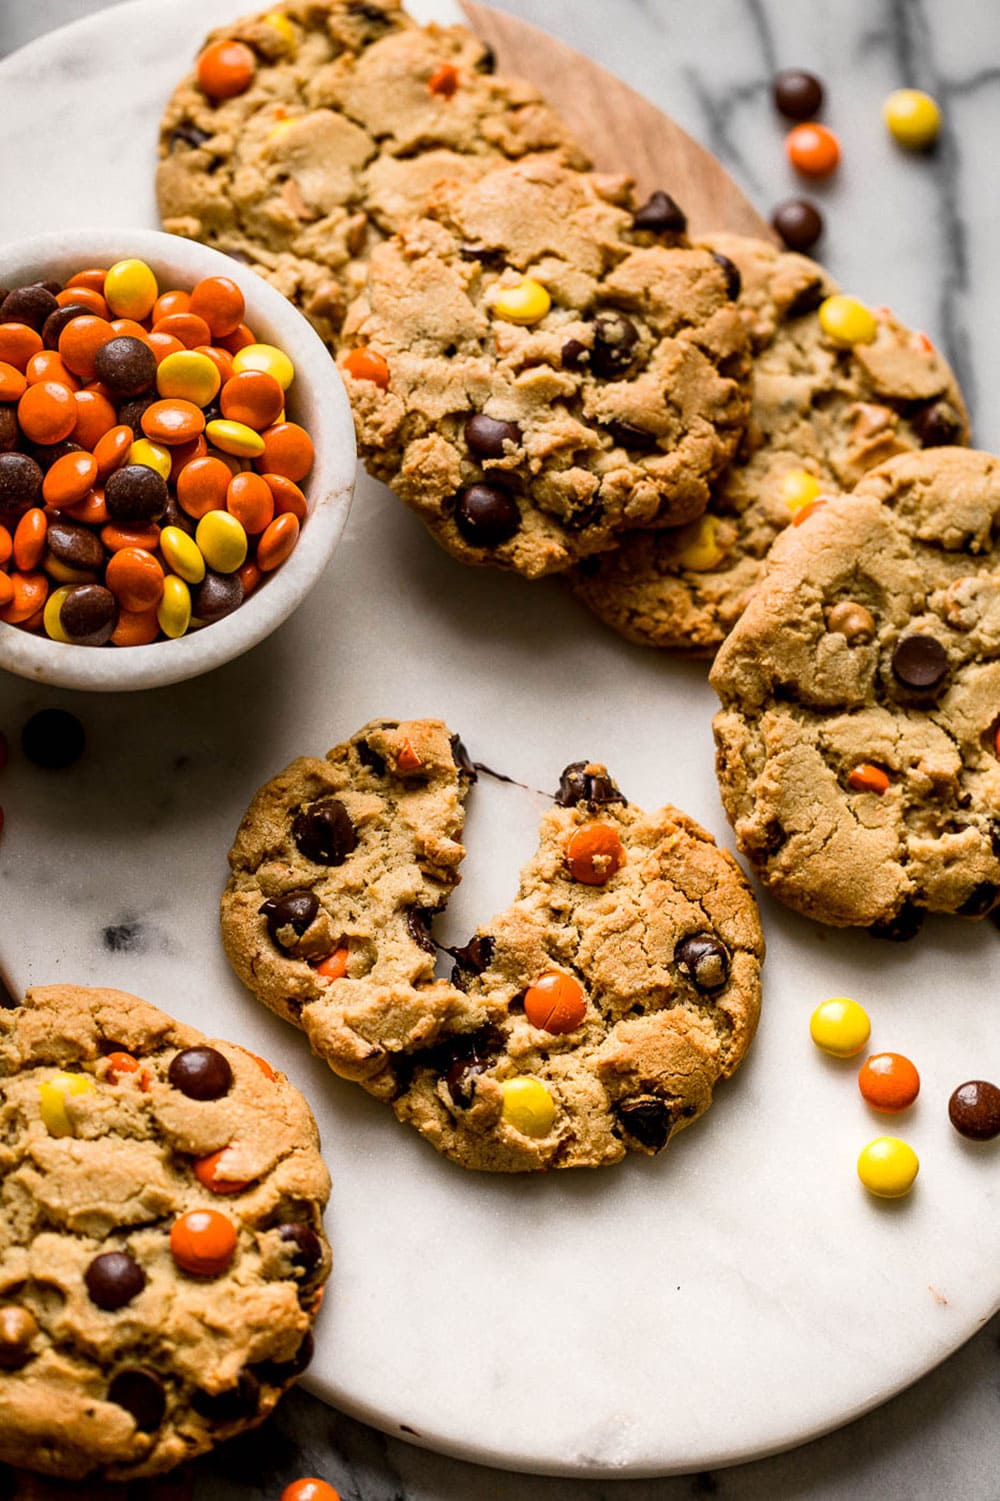 Giant Reese's Pieces Chocolate Chip Cookies are thick, chewy, chunky, and soft. Another incredible combination of peanut butter and chocolate!